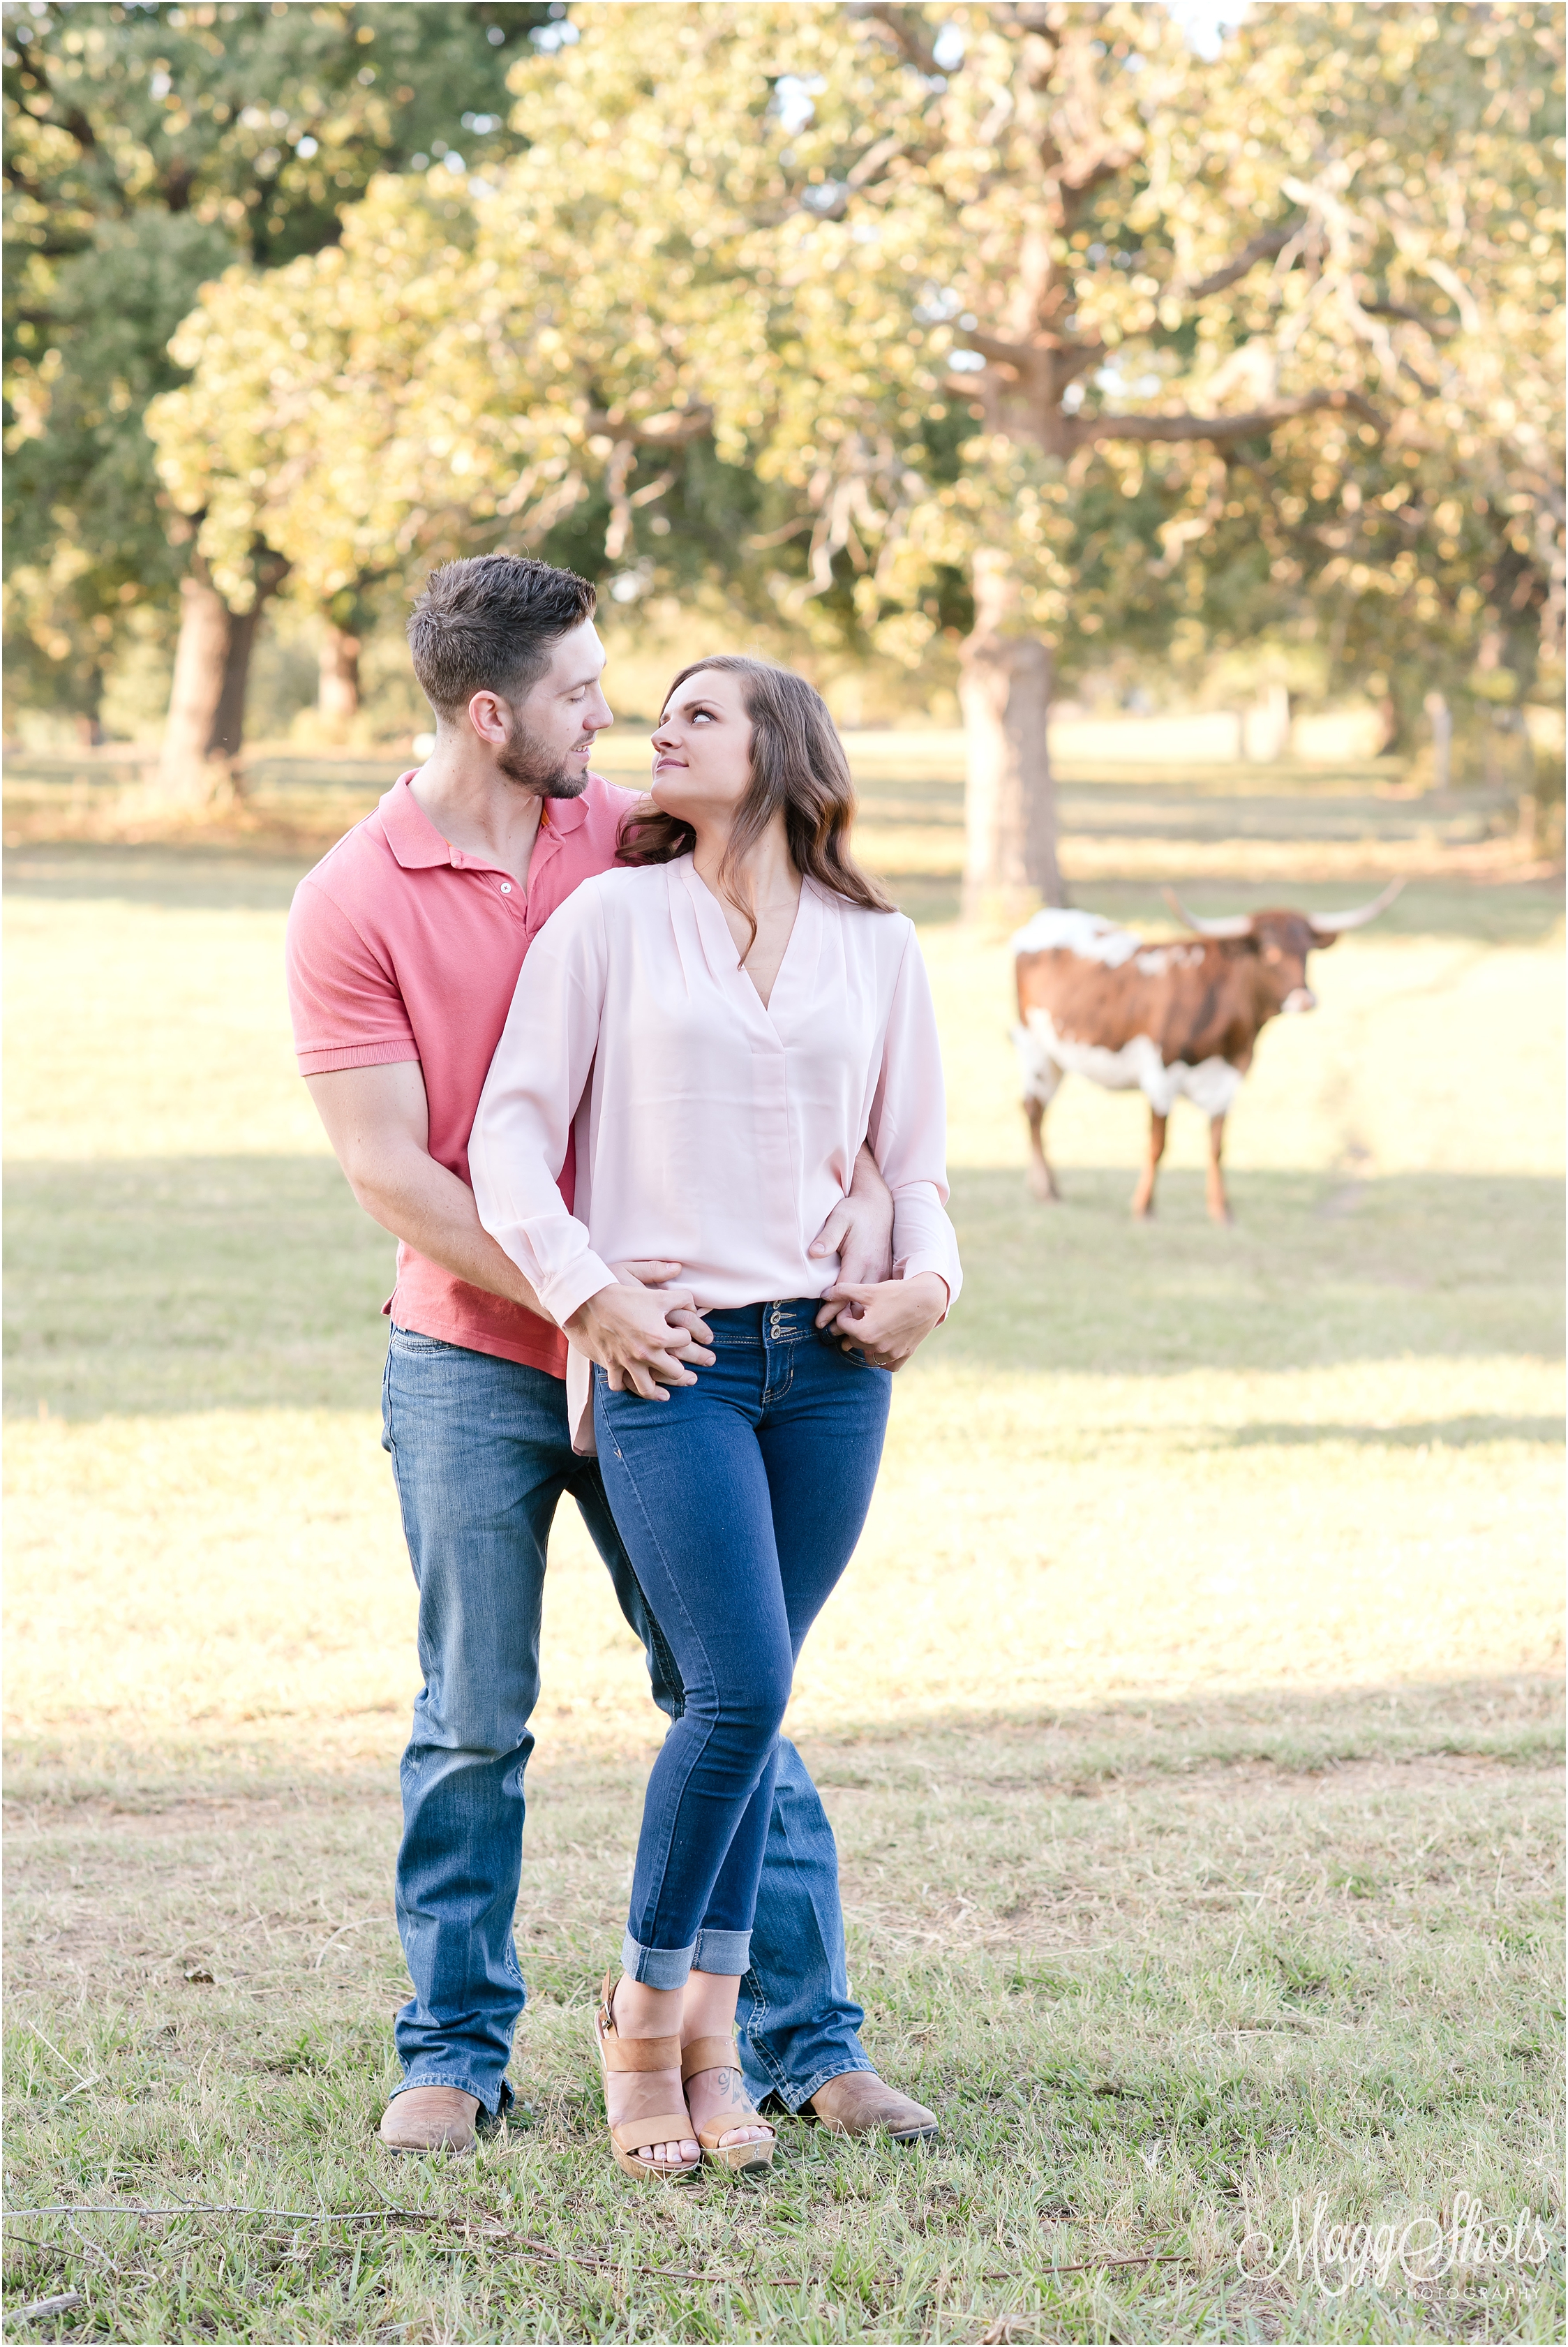 Engagement Session, Paige and Ian, Love, Green Acres Park, Engagement, Bride and Groom, MaggShots Photography, MaggShots, Professional Photography, Professional Photographer, DFW Photographer, Wedding Photographer, Destination Photographer, Cows, Longhorns